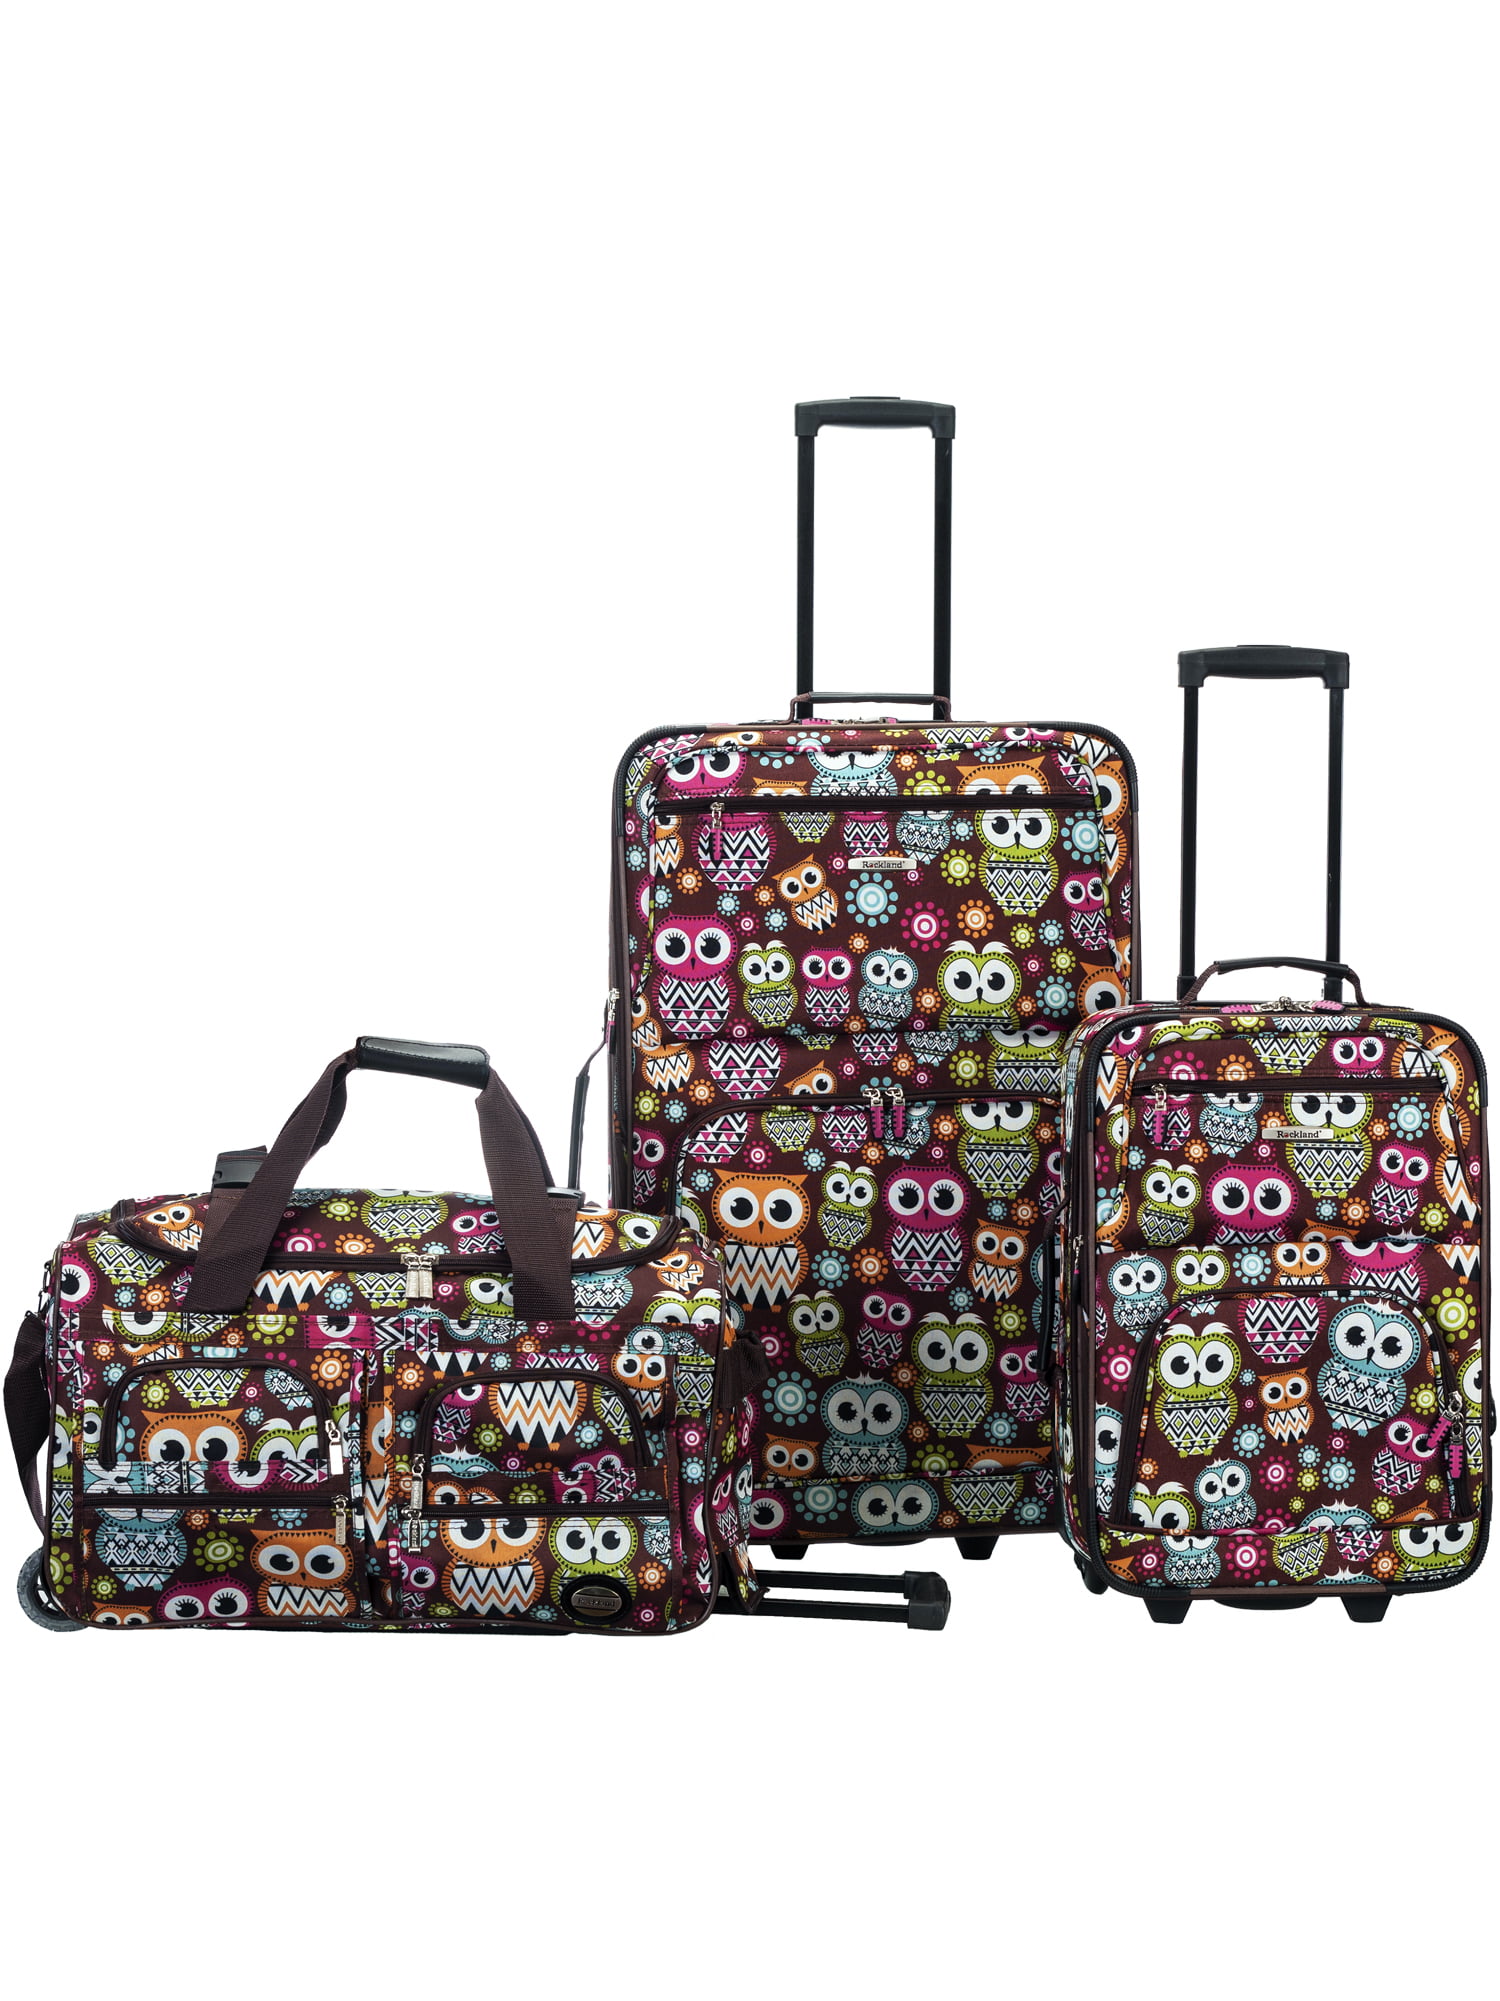 Rockland Spectra 3pc Softside Carry On Luggage Set - Owl